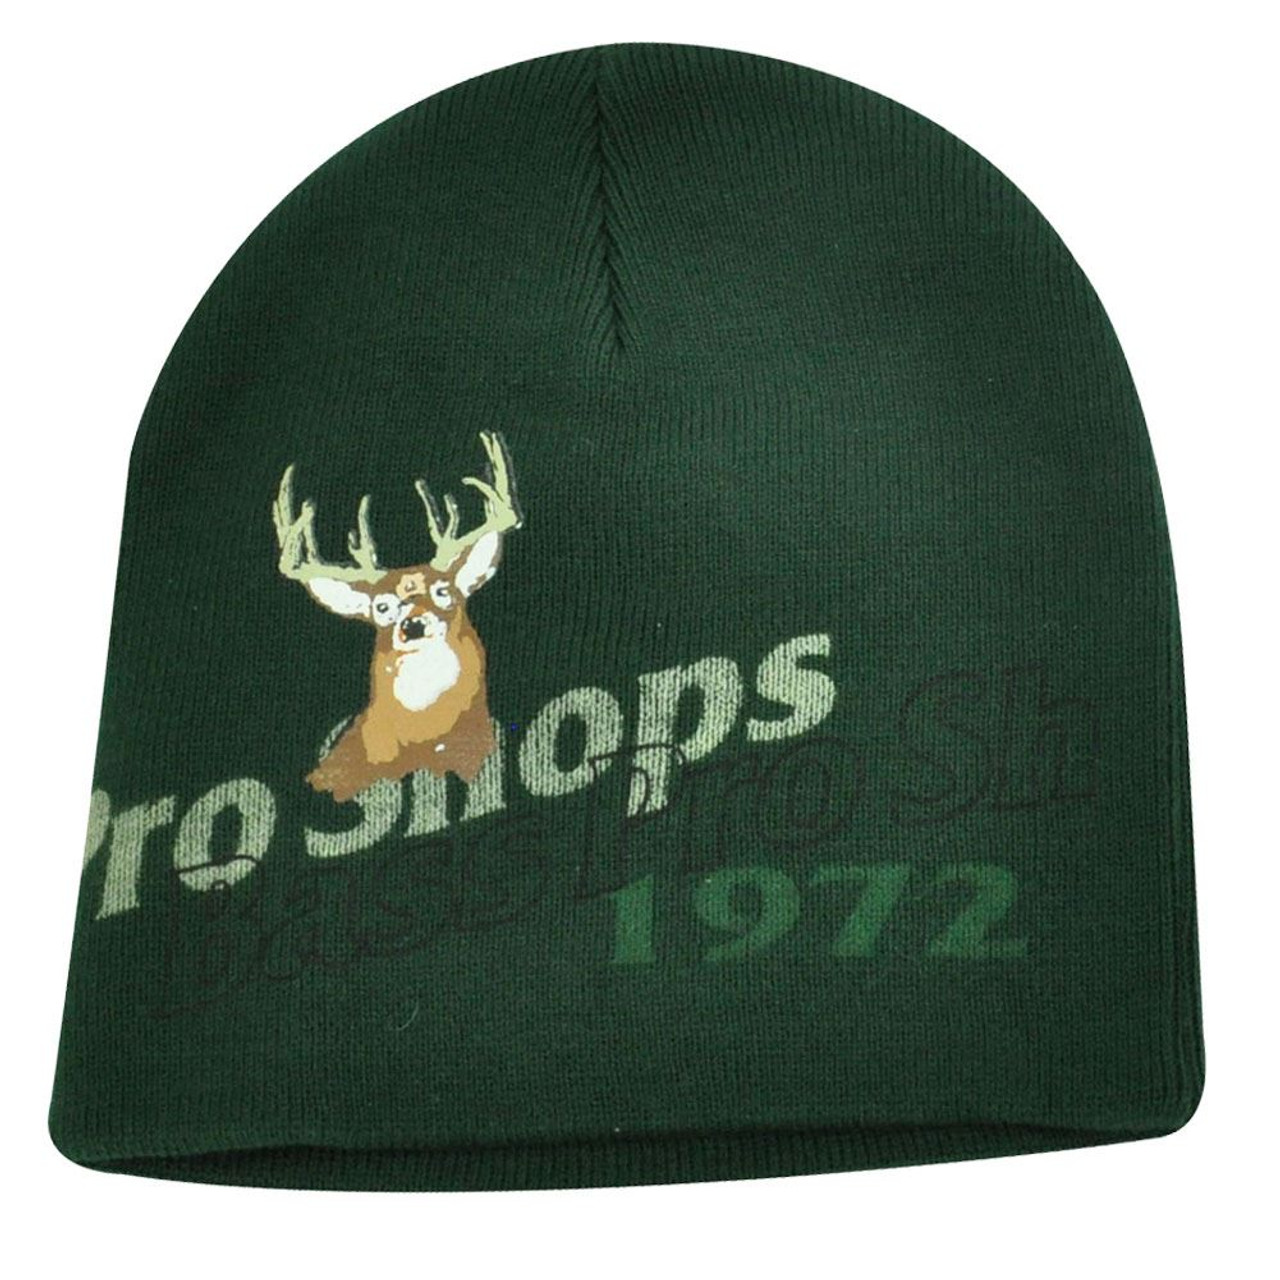 HAT BEANIE SKULLY KNIT BASS PRO SHOPS HUNTING FISHING CAMPING OUTDOOR DEER  GREEN - Cap Store Online.com